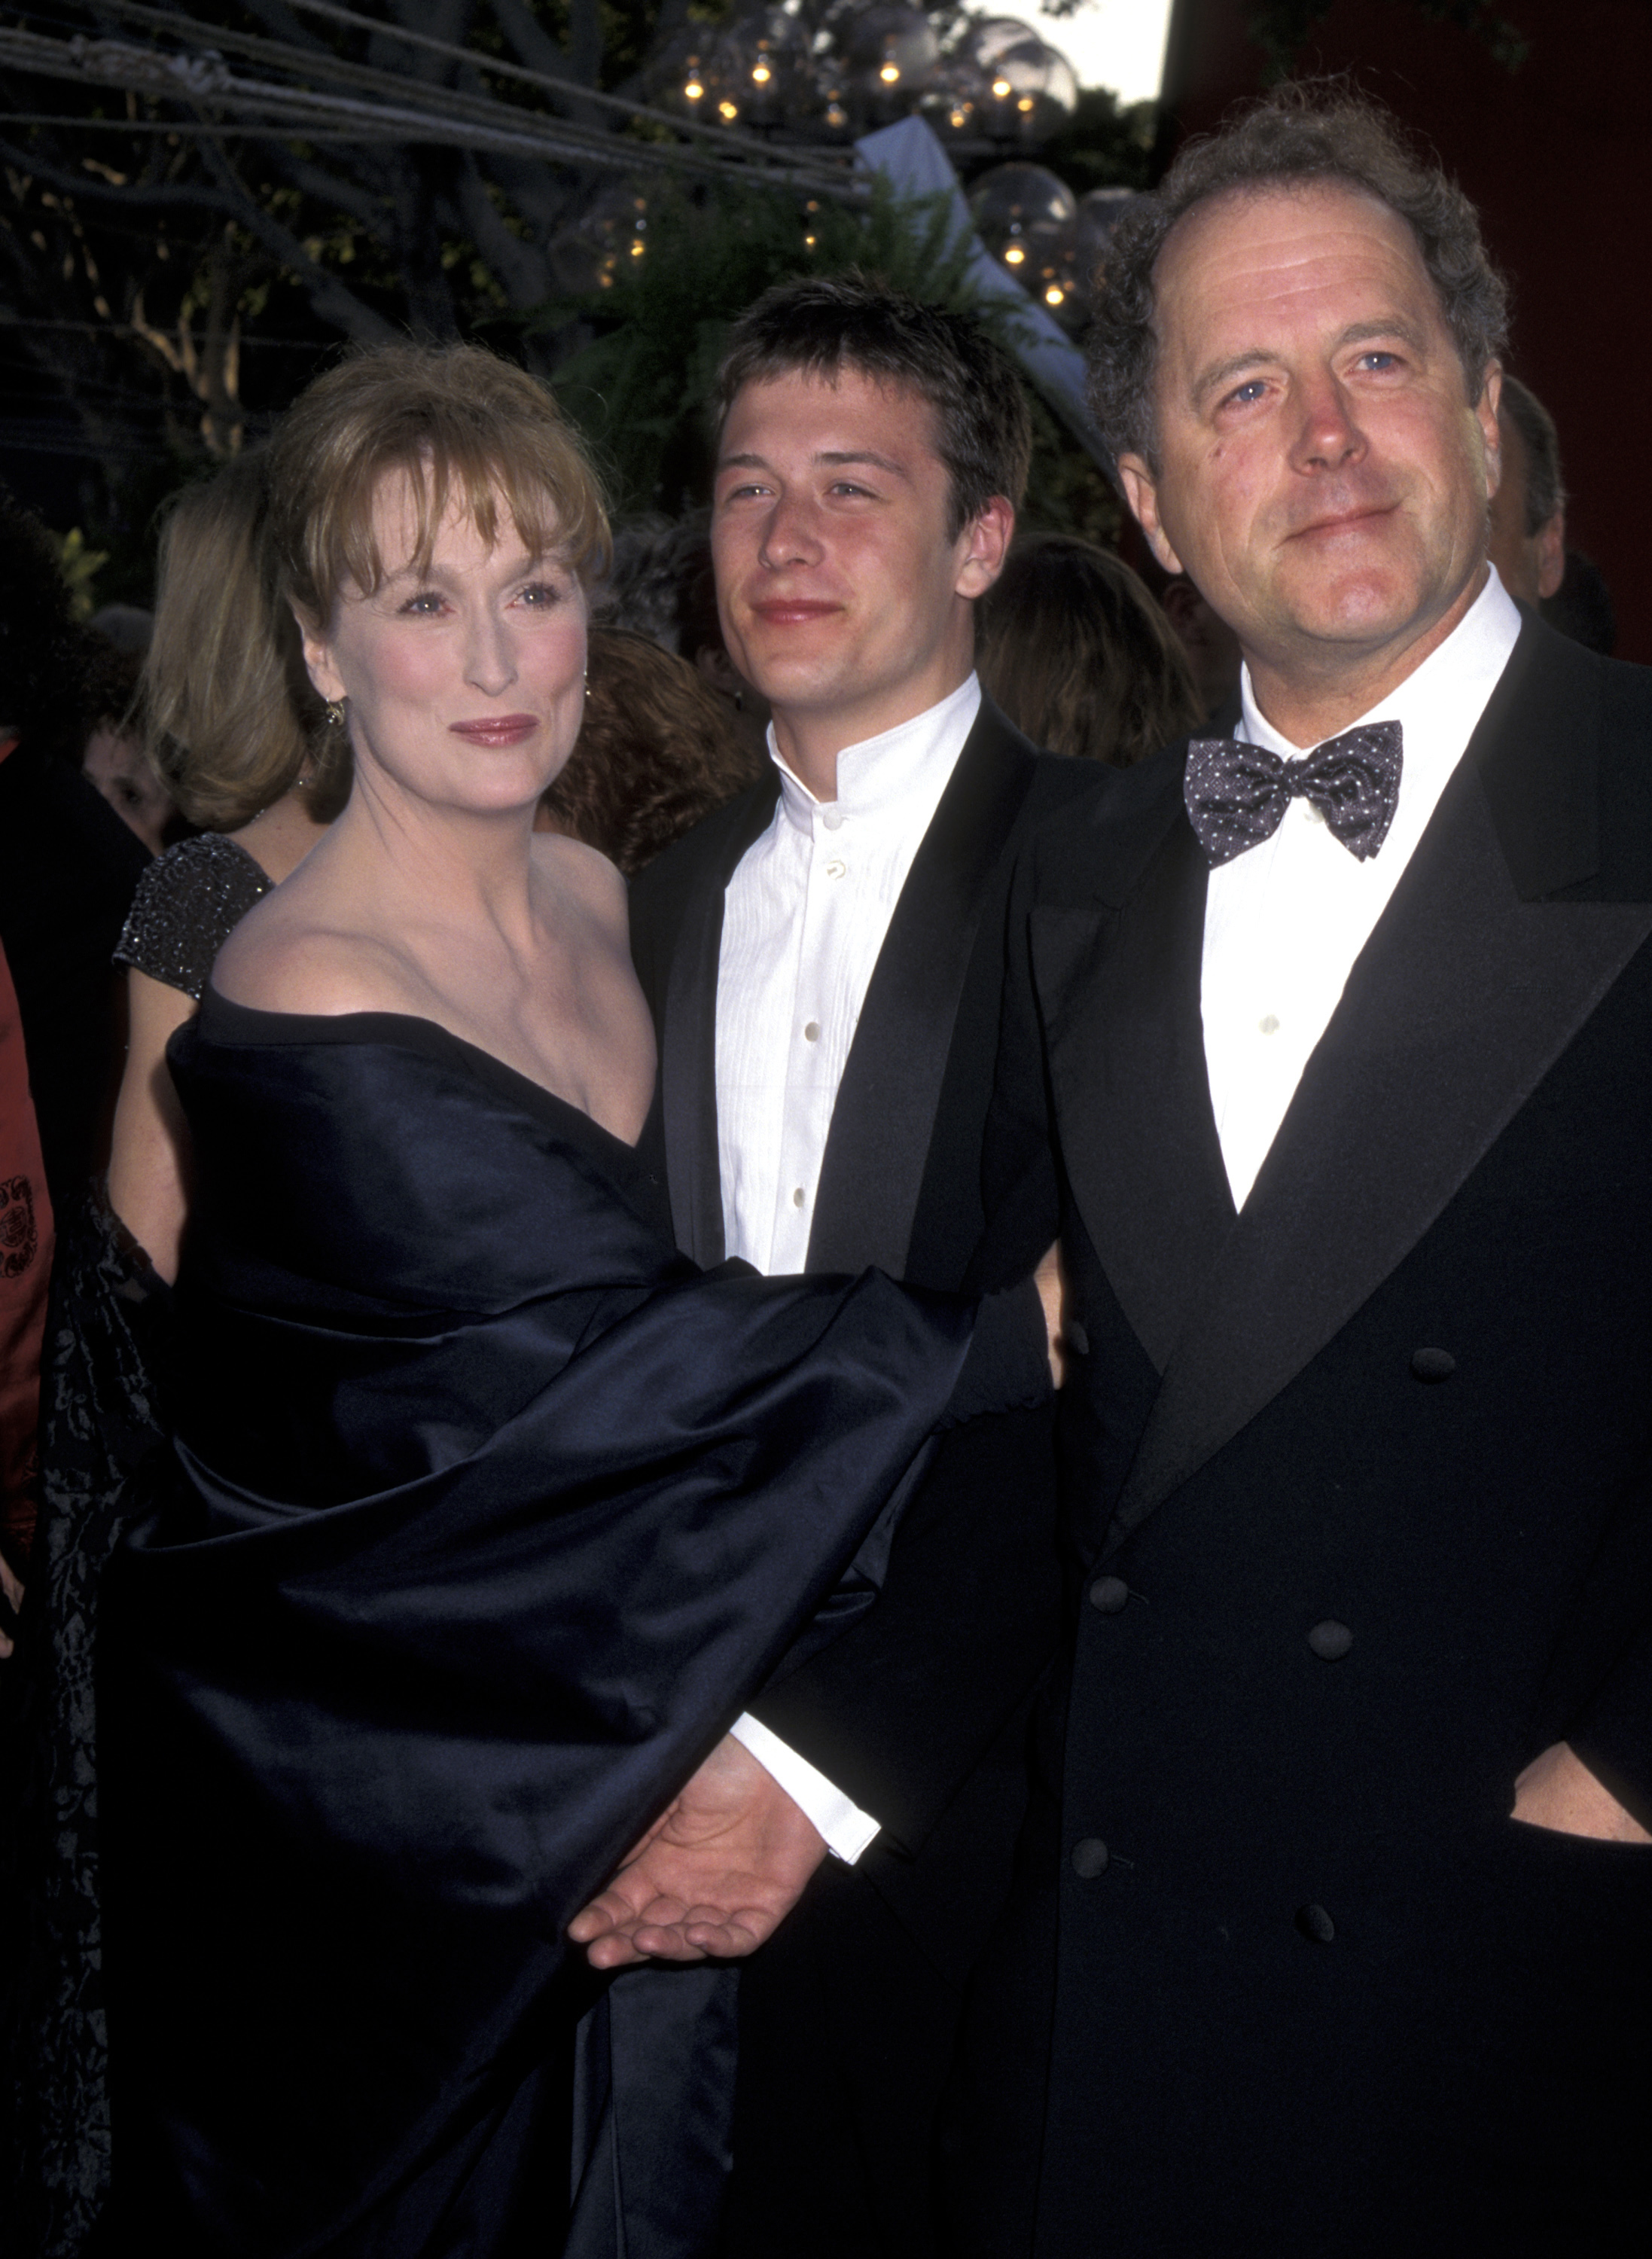 Meryl Streep with her son Henry Gummer and her husband Donald Gummer at the 68th Annual Academy Awards on March 25, 1996 | Source: Getty Images